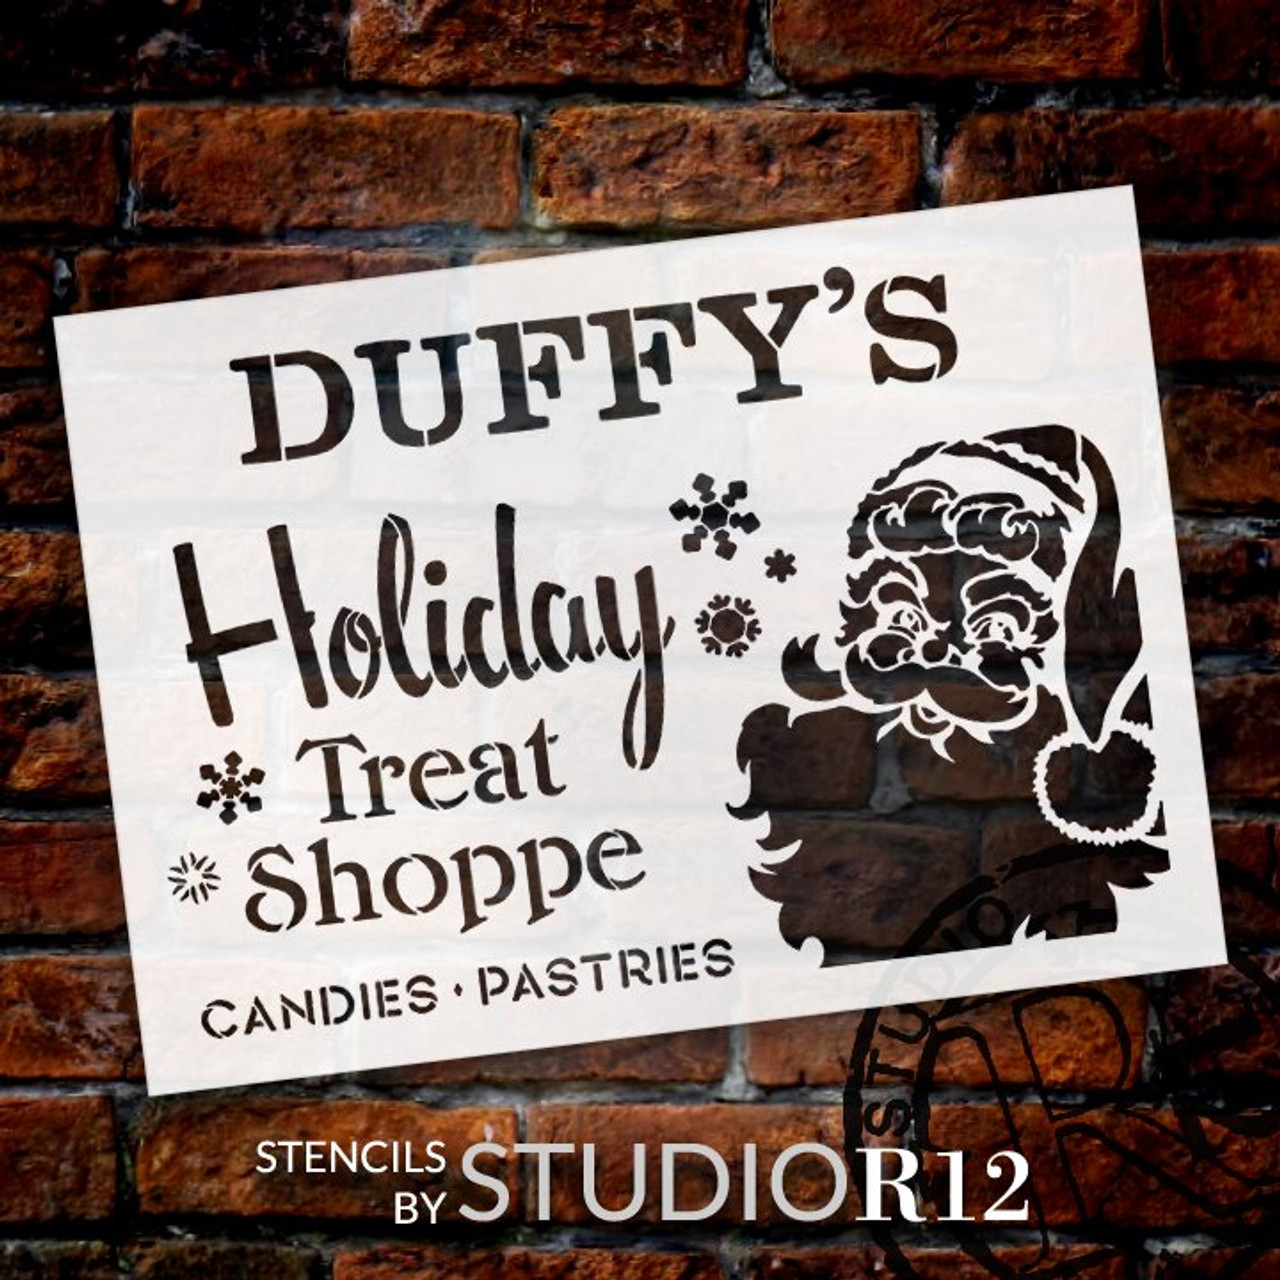 Personalized Holiday Treat Shoppe Stencil by StudioR12 | DIY Custom Christmas Kitchen Decor | Paint Wood Signs | Select Size